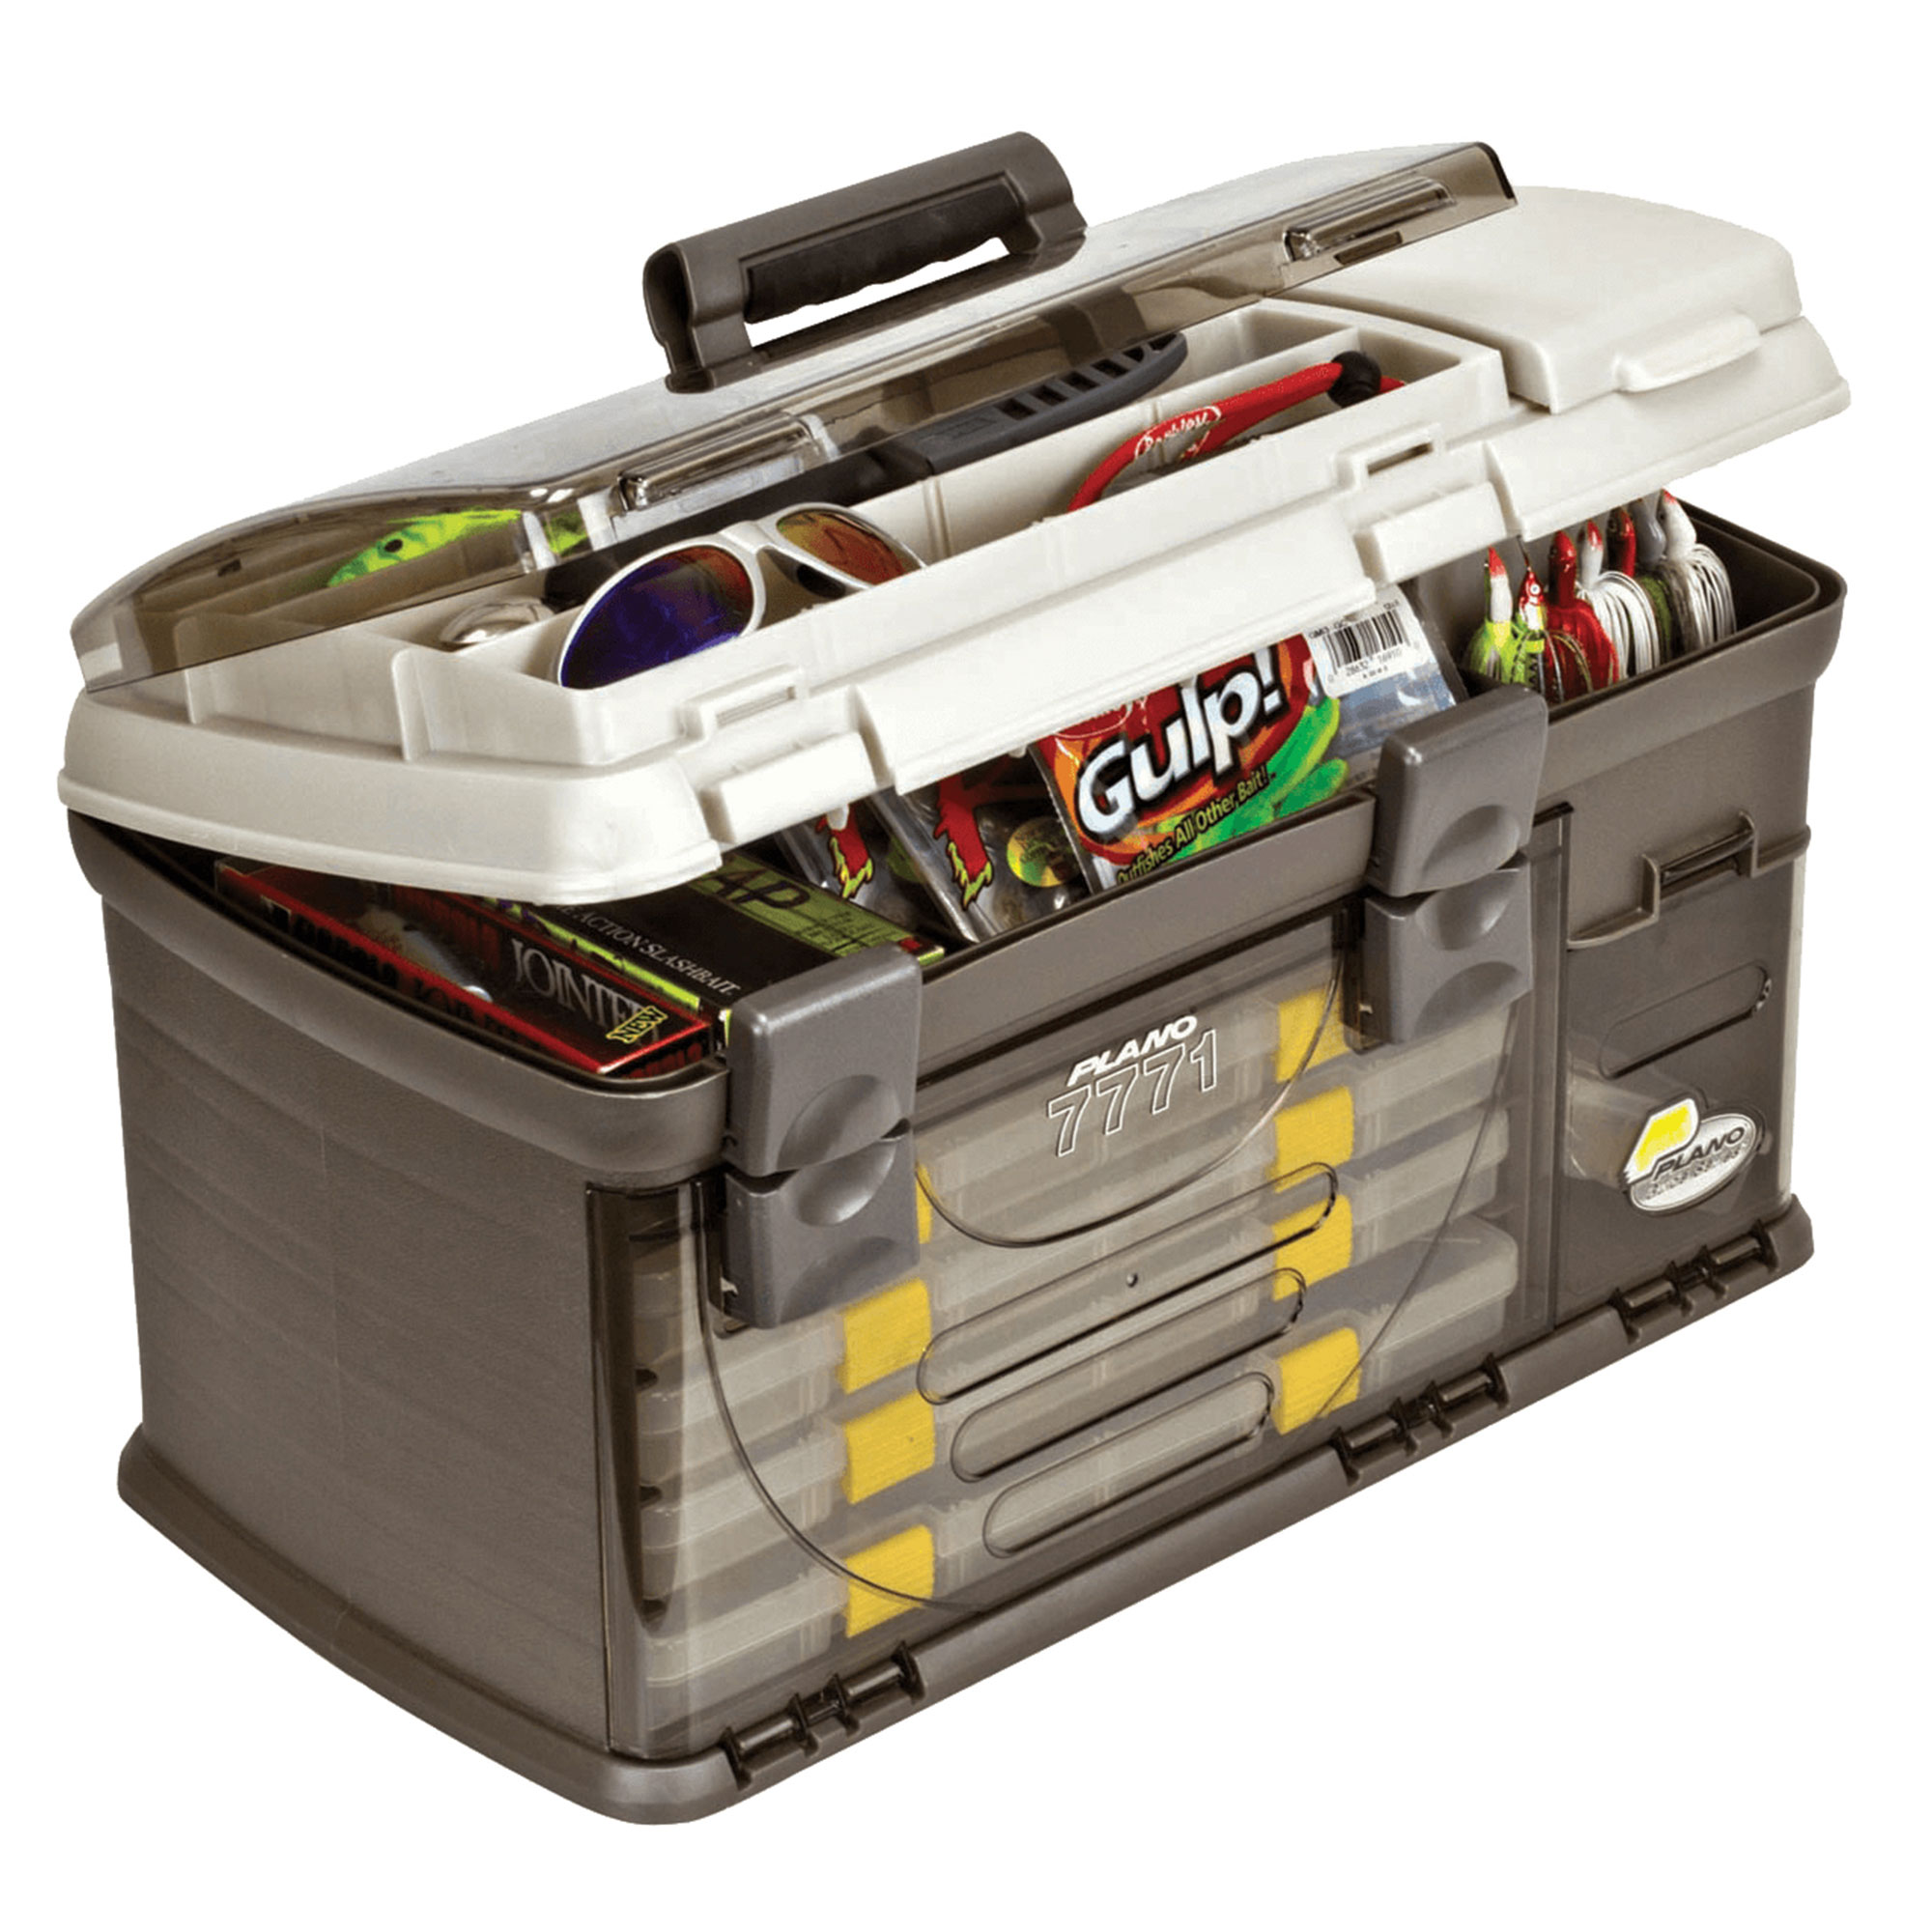 Plano Fishing Guide Series Five Utility Pro System Tackle Box, Graphite / Sandstone - image 1 of 6